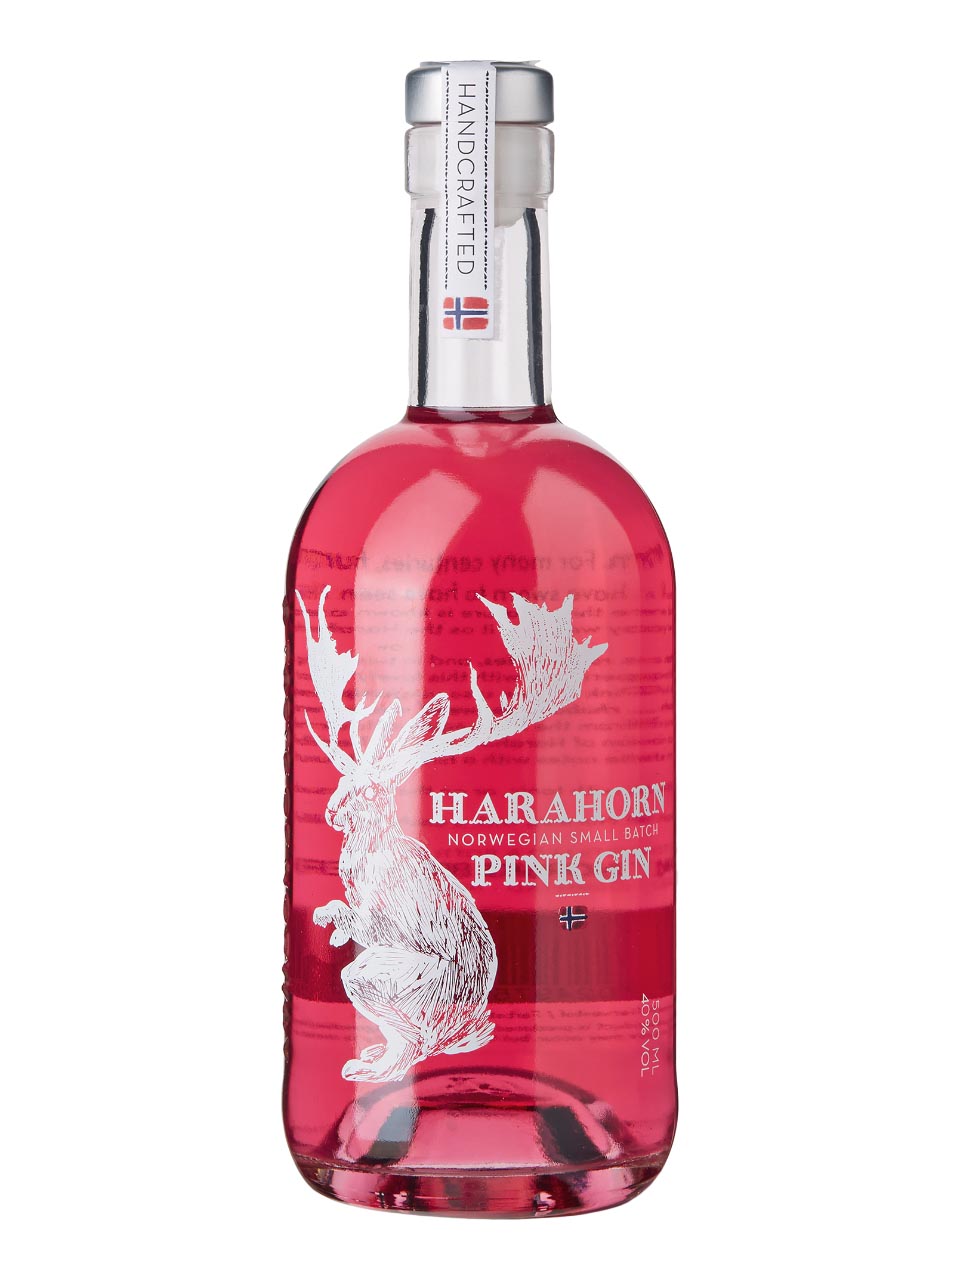 Harahorn Pink Gin 40% 0.5L* null - onesize - 1